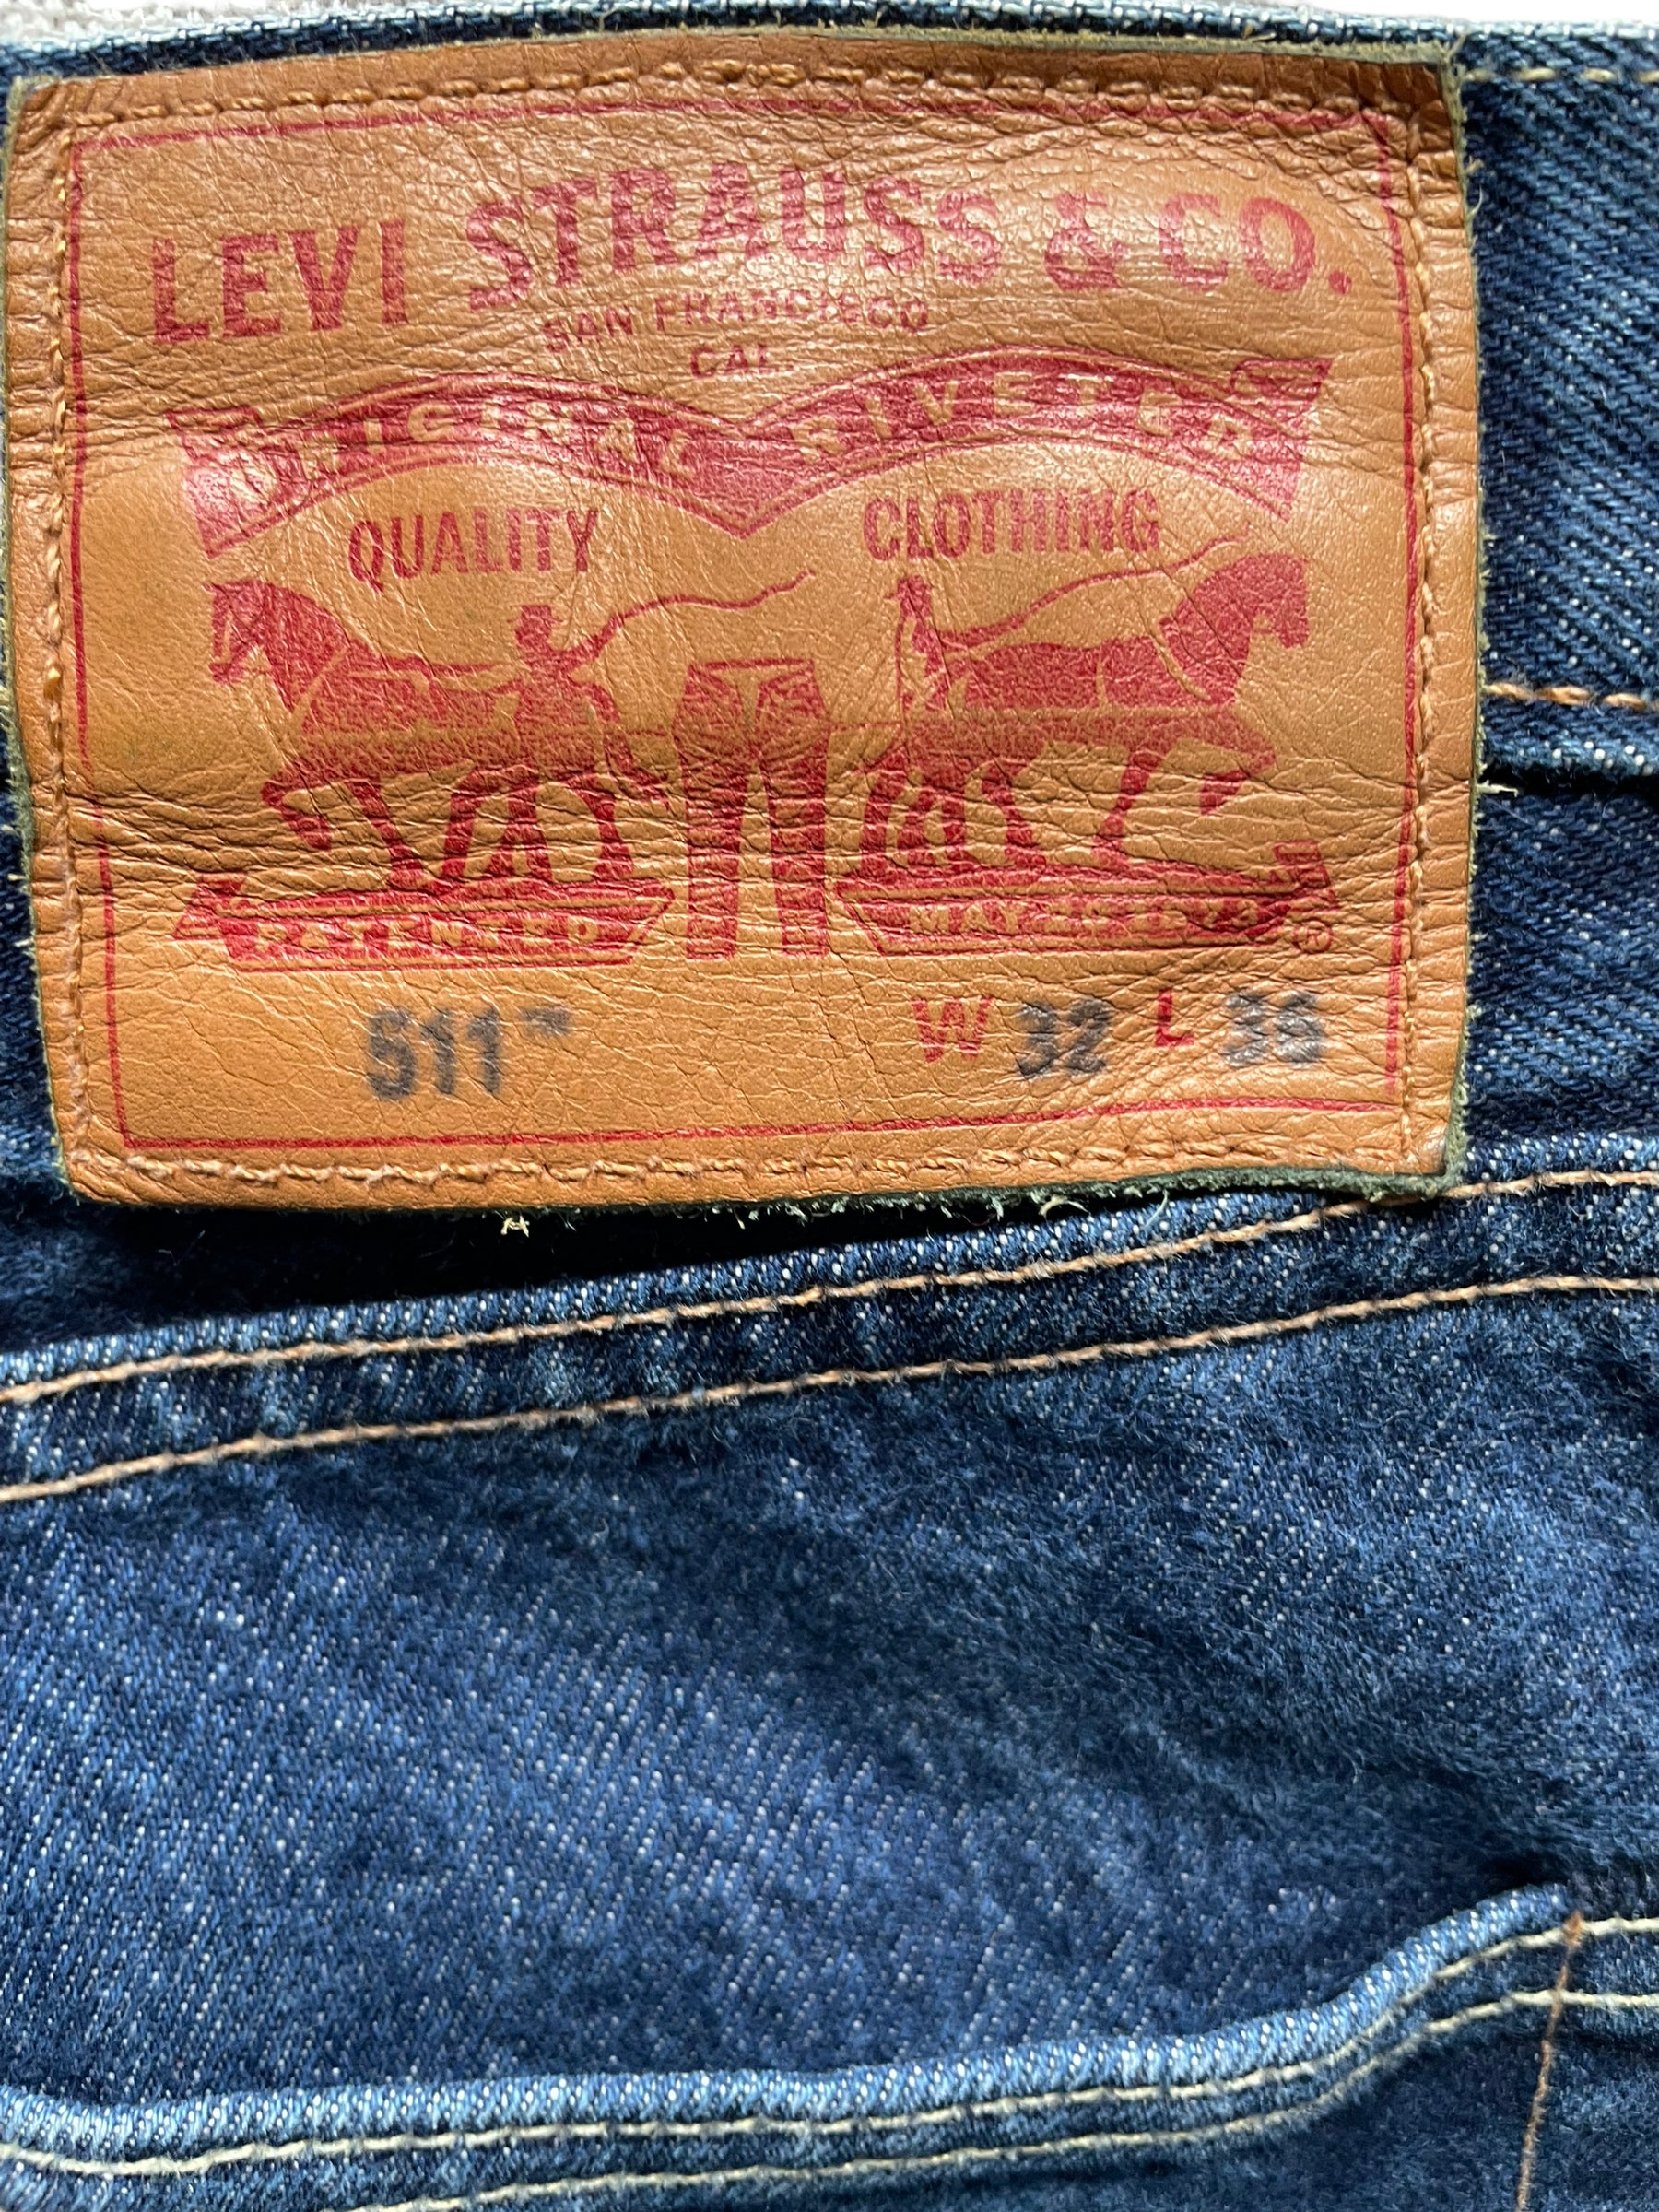 Leather tag view of Levi's 511 Selvedge Denim 32x36